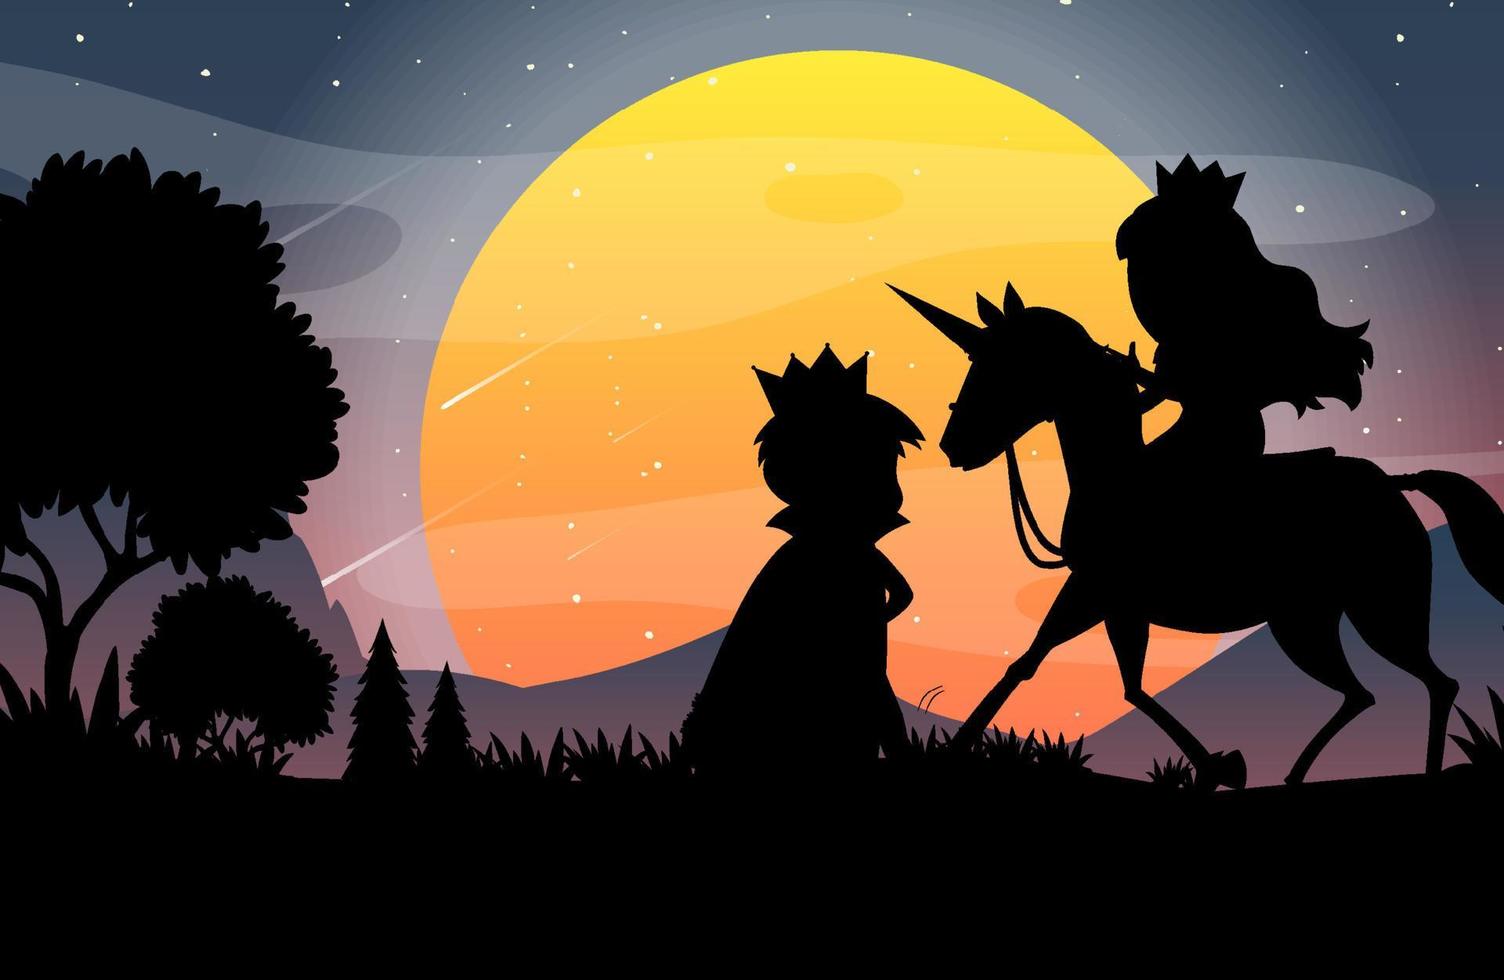 Halloween night background with prince and princess silhouette vector